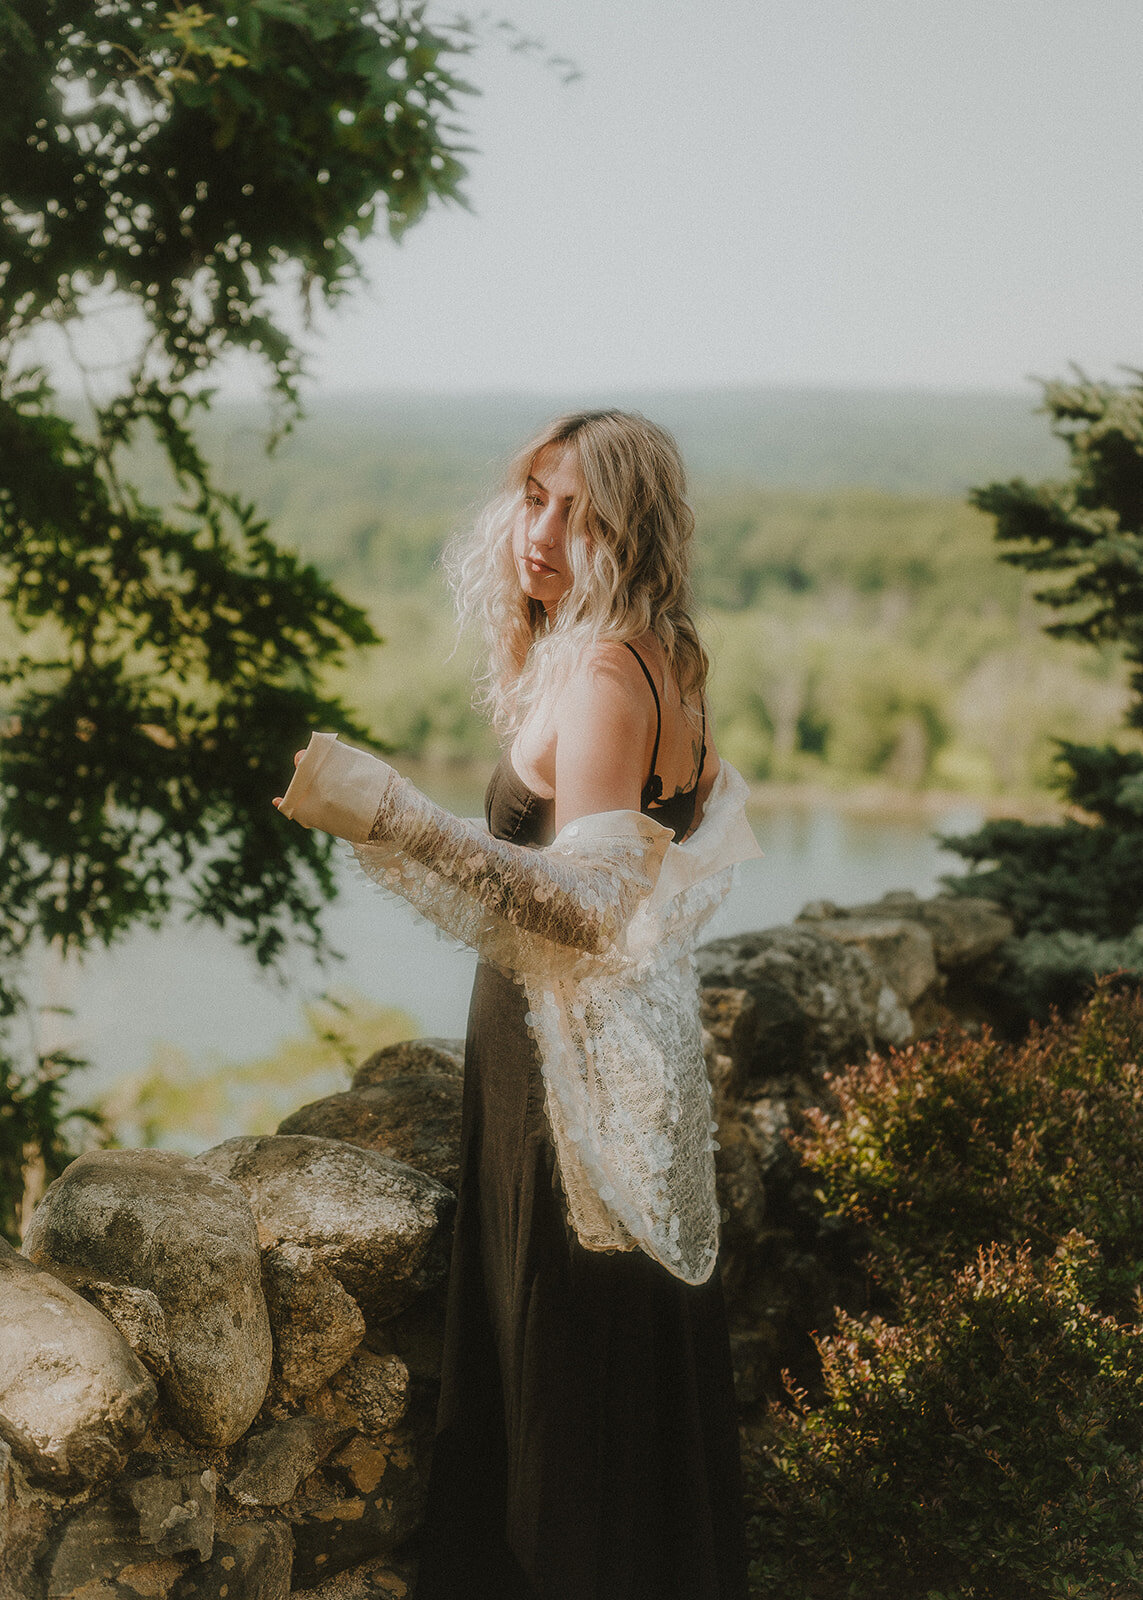 Sara McIngvale is a portrait photographer based in Connecticut